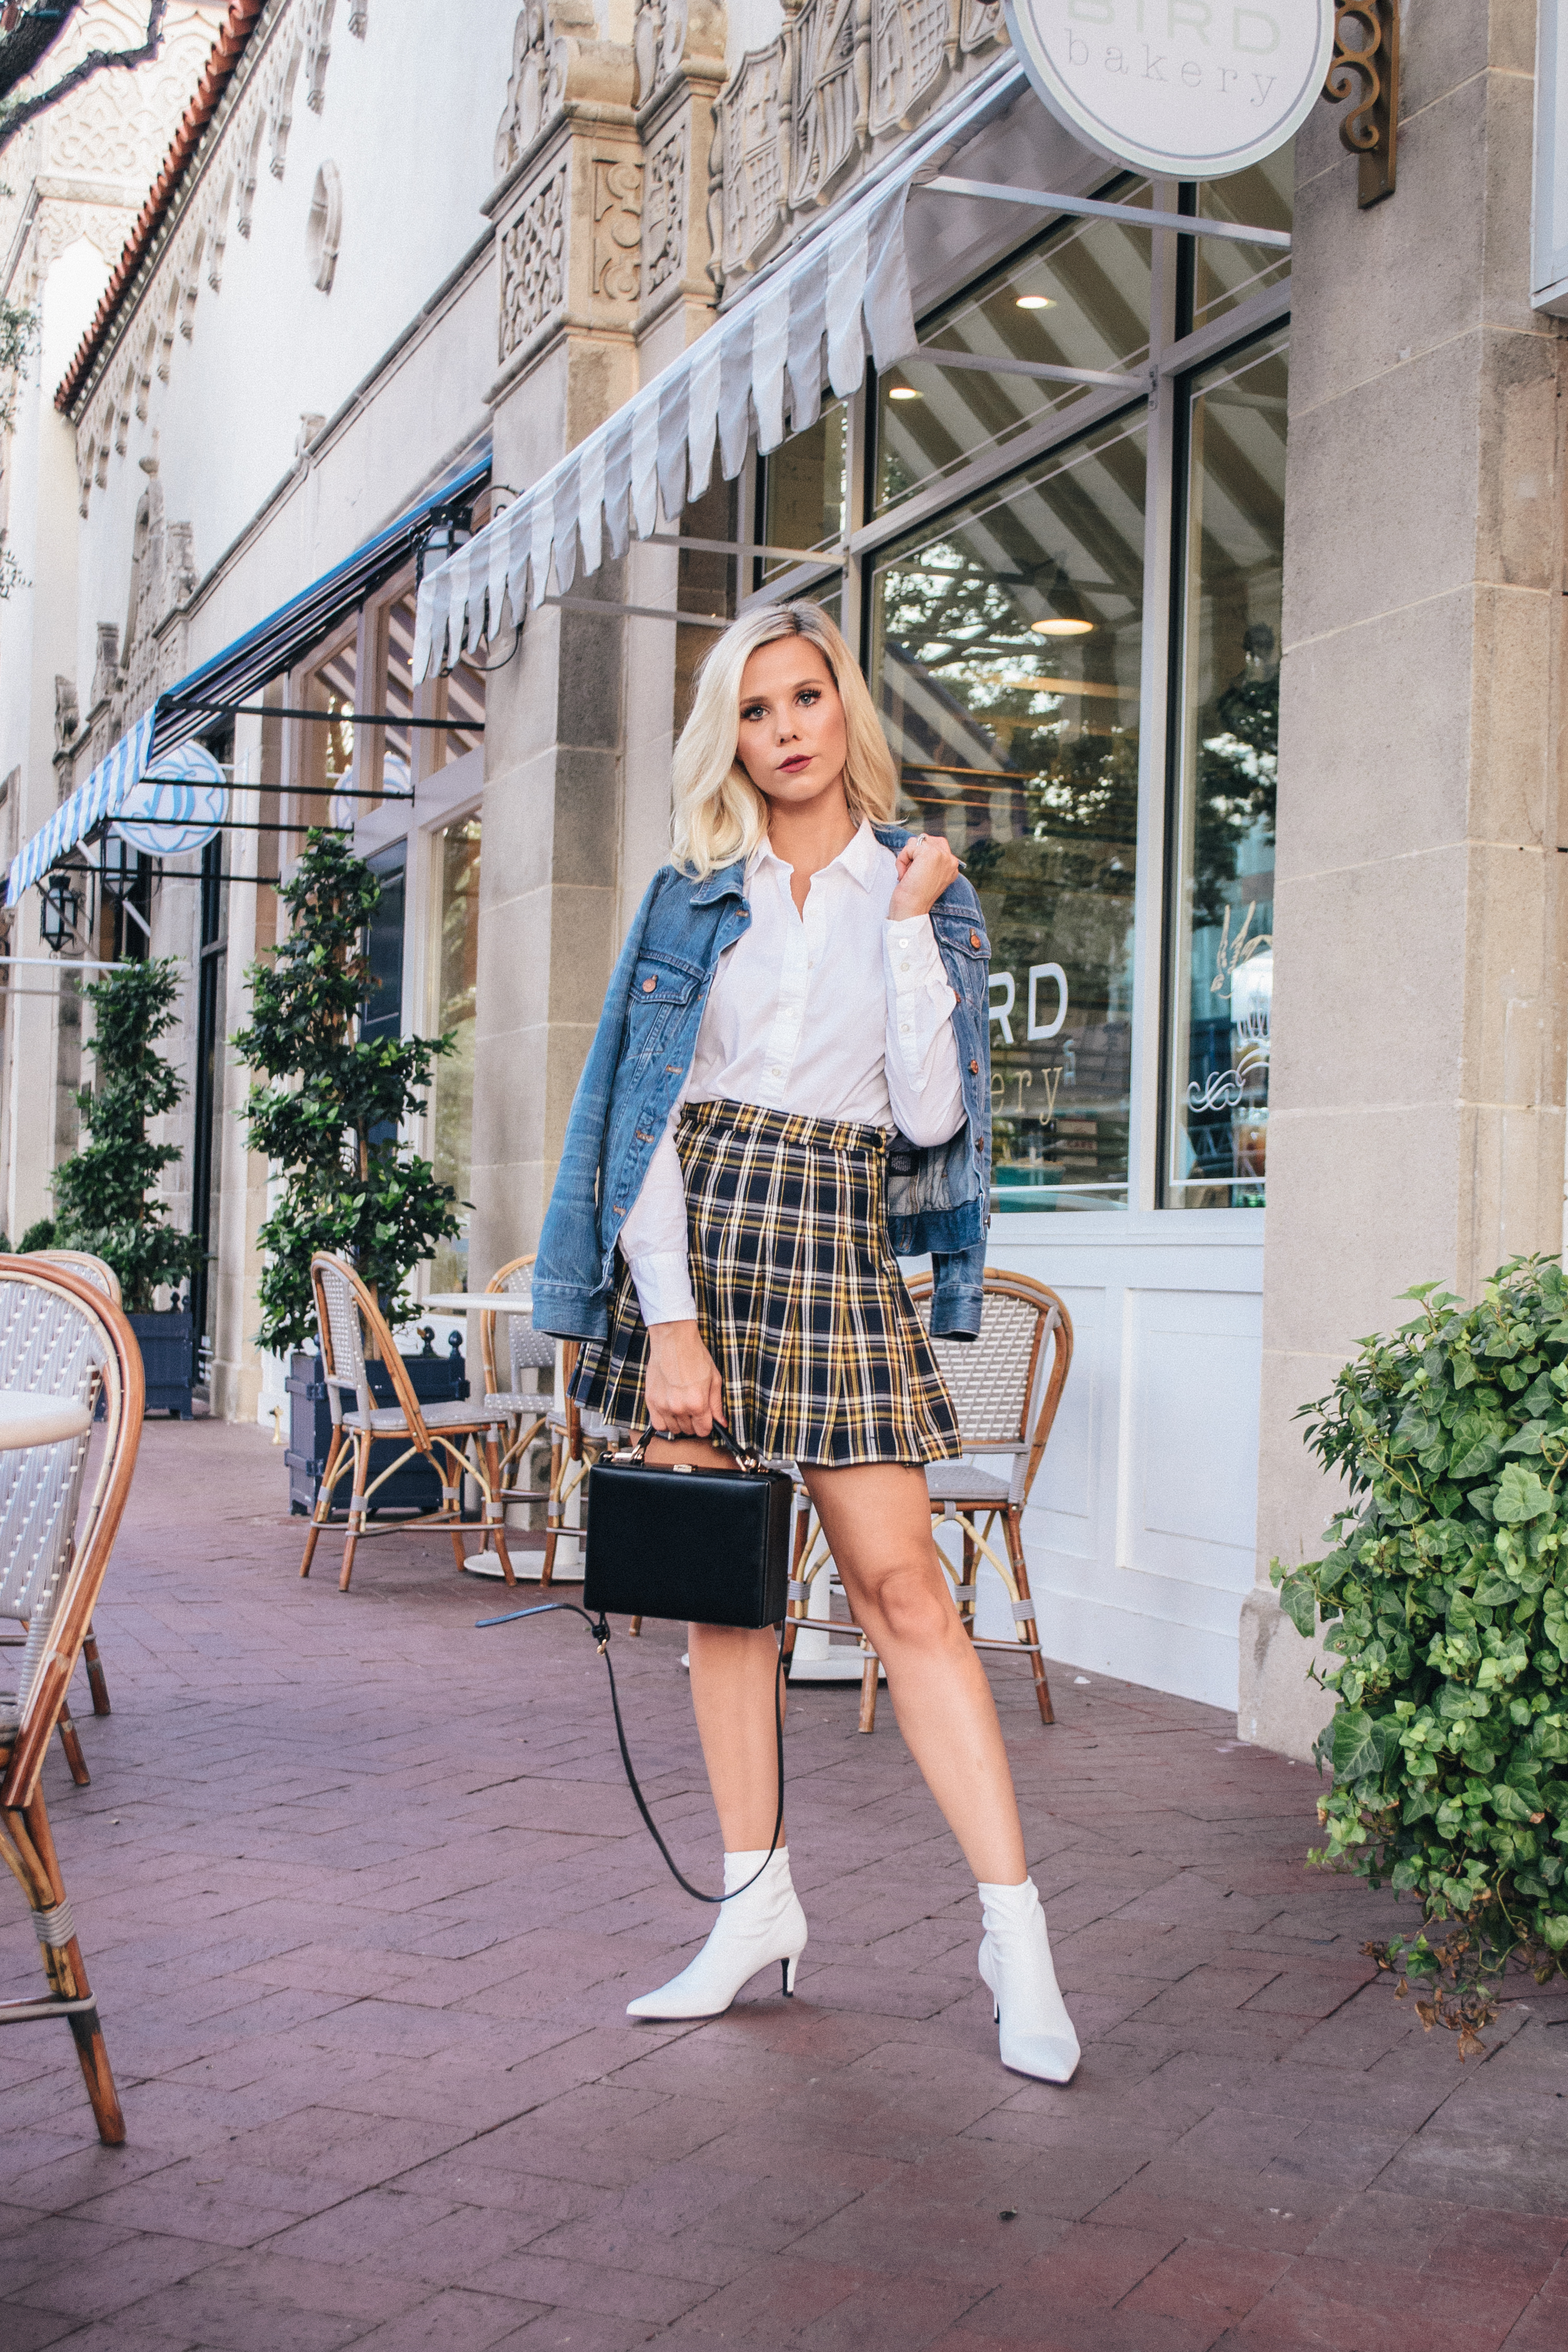 Get on board the clueless fashion trend for fall #fallfashion #falloutfit #schoolgirl